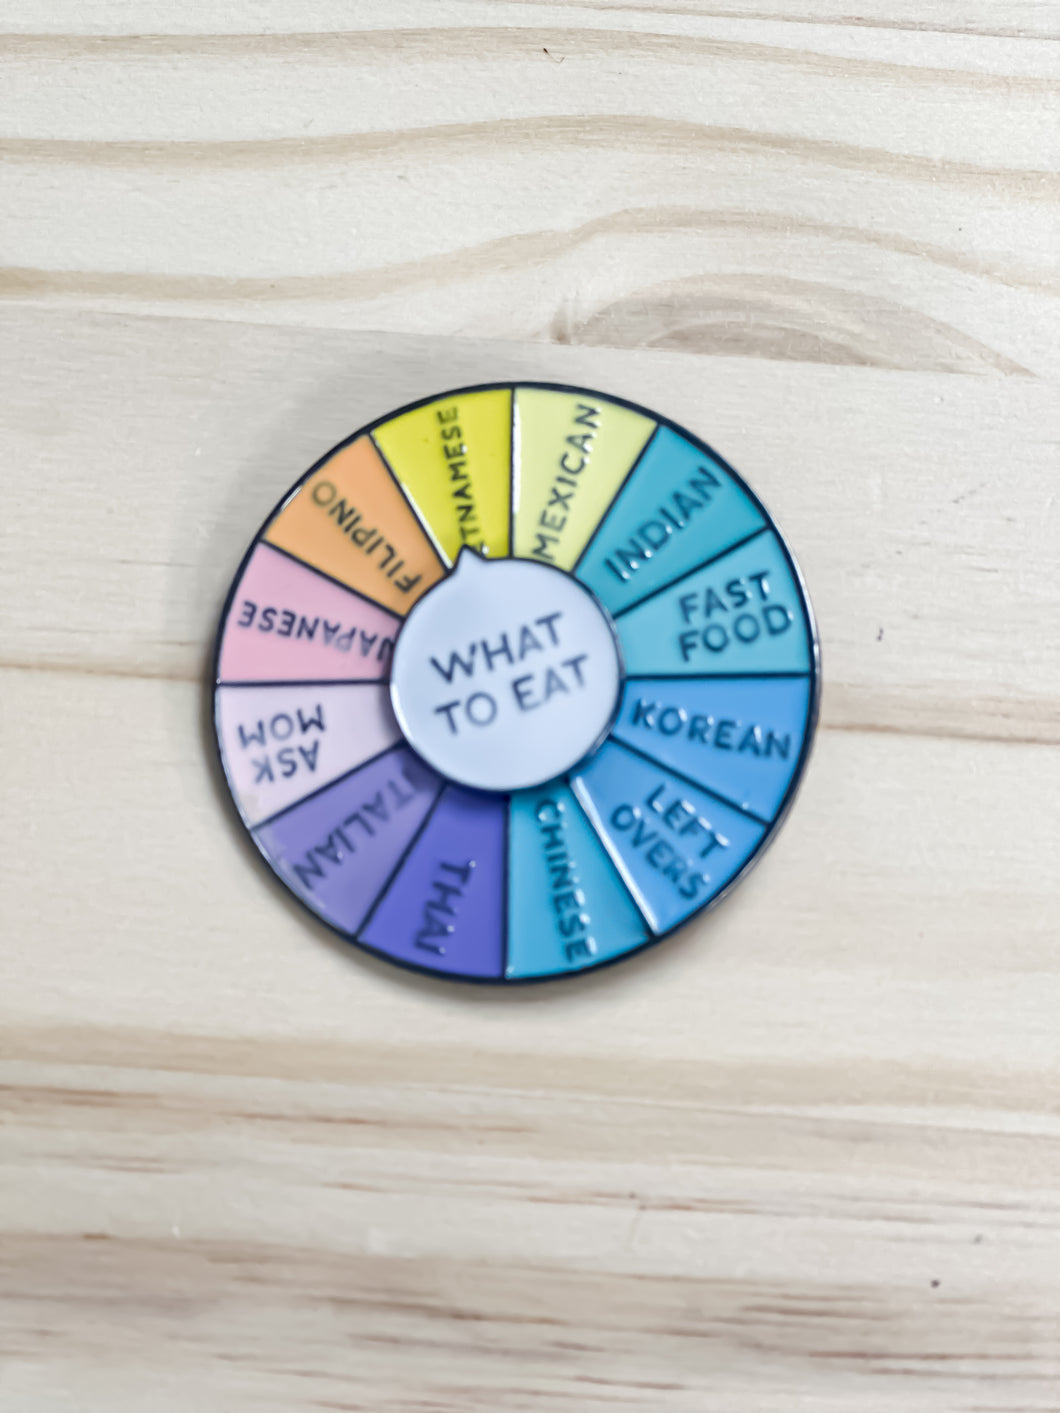 What to eat spinner pin